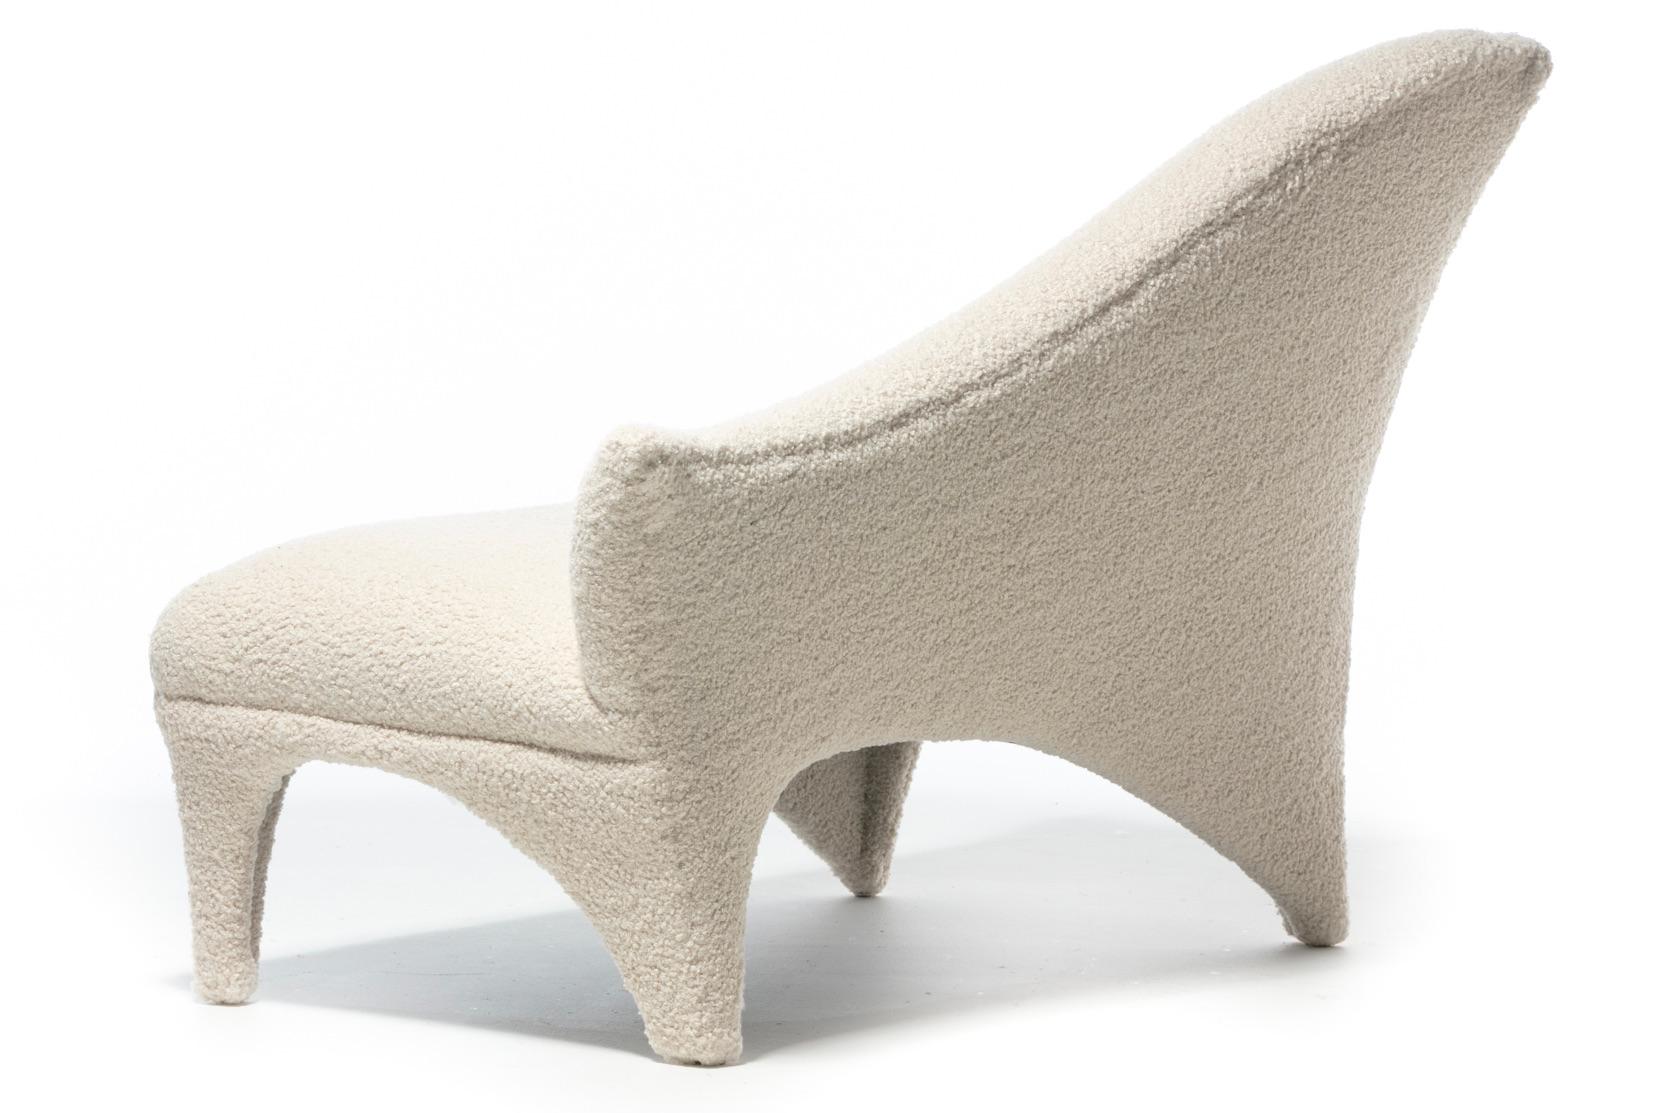 Vladimir Kagan A-Symmetric Settee in Ivory Bouclé by Directional, c. 1991 For Sale 1